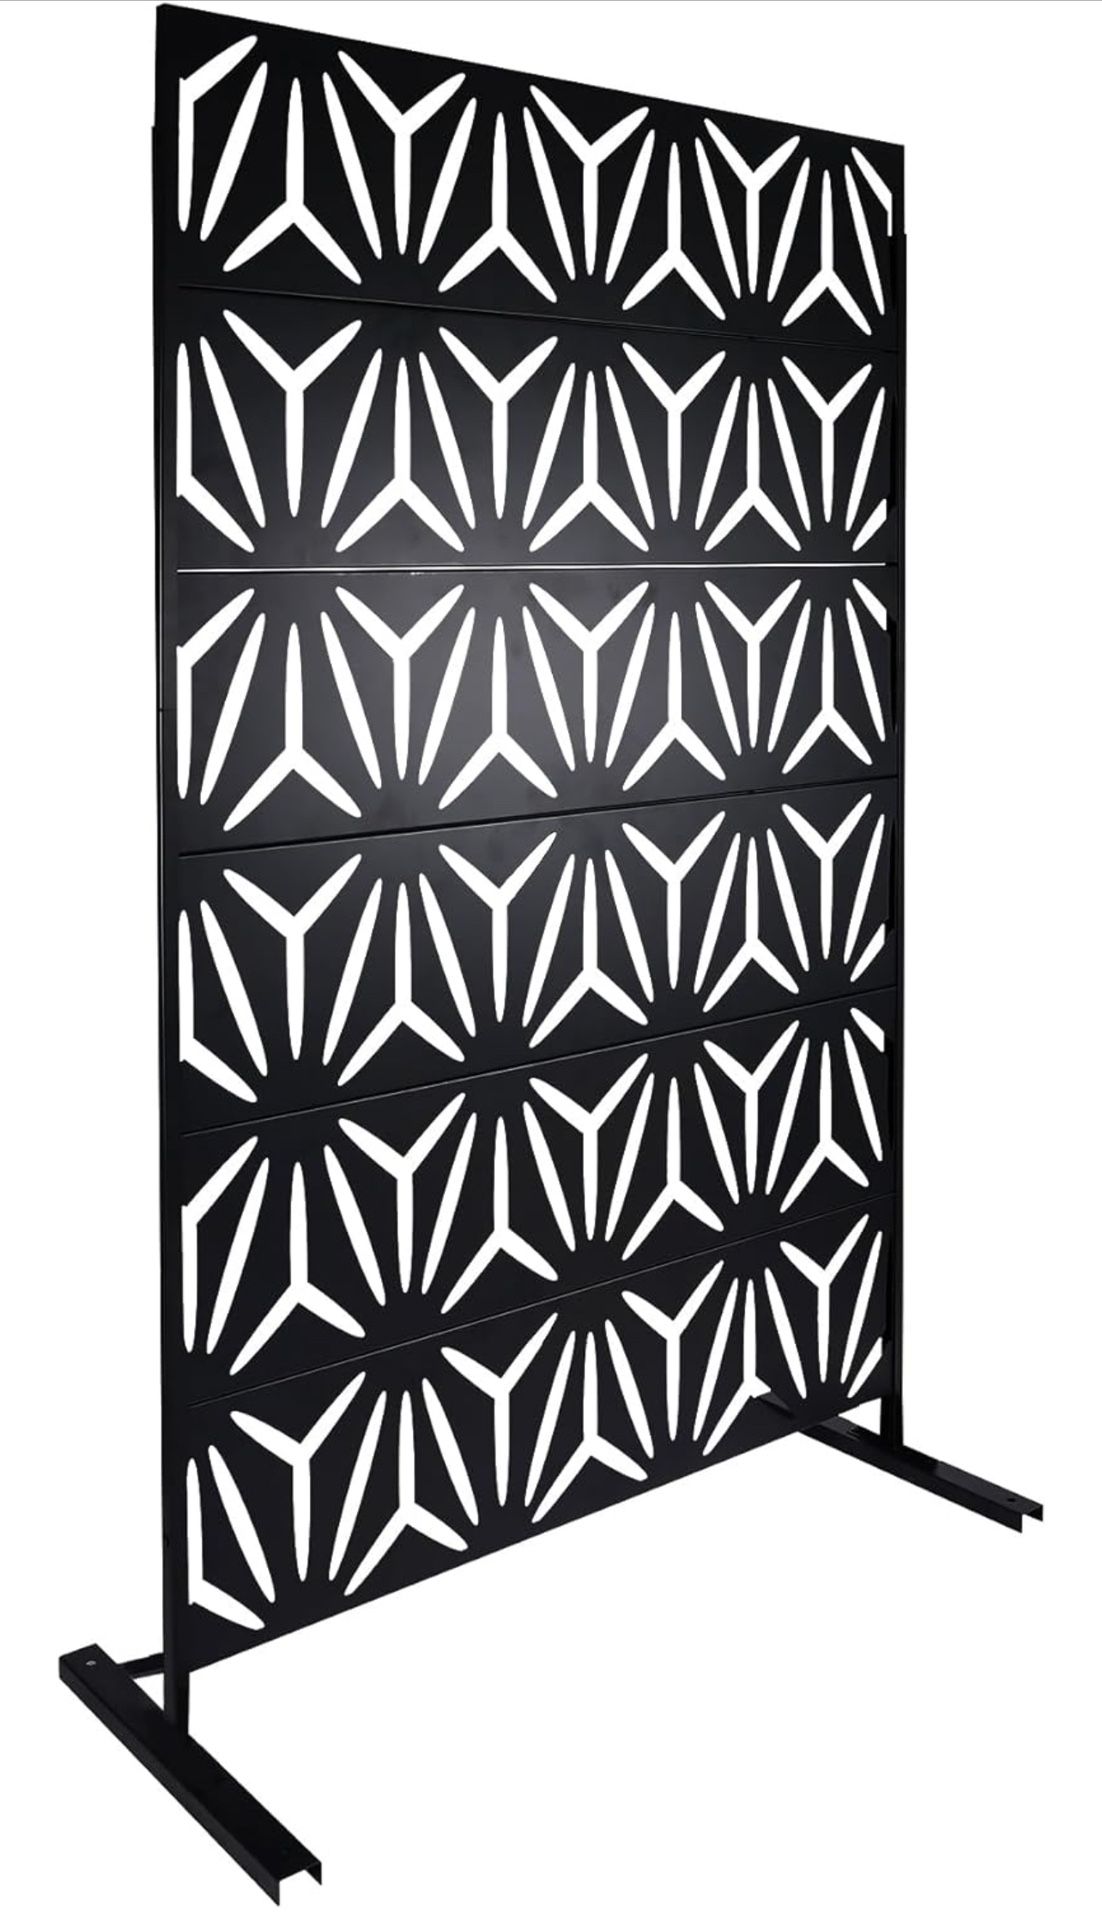 Metal Outdoor Privacy Screen, 72"H×47"W Freestanding Privacy Fence Screen Panels with Stand, Adjustable Indoor Outdoor Room Decorative Divider for Hom